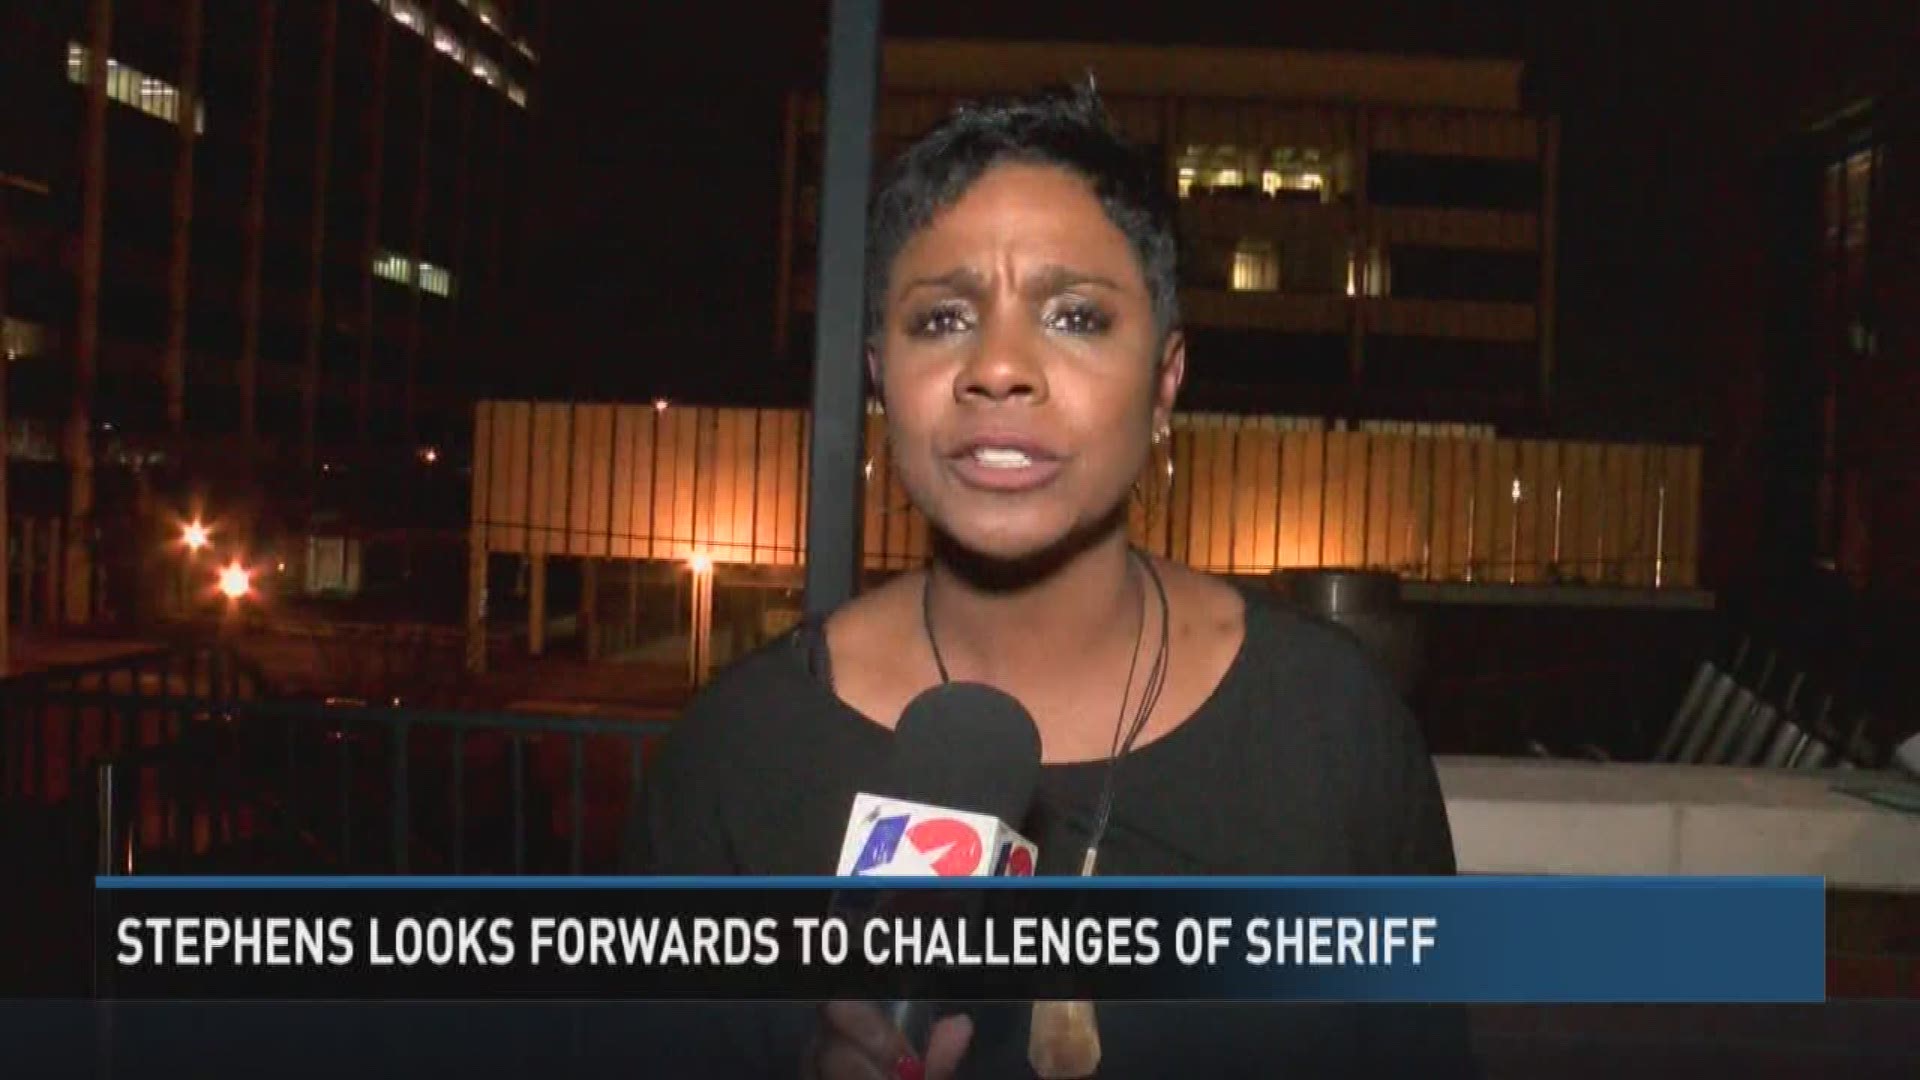 Jefferson County Sheriff-Elect Zena Stephens looks forwards to the challenges of being sheriff.